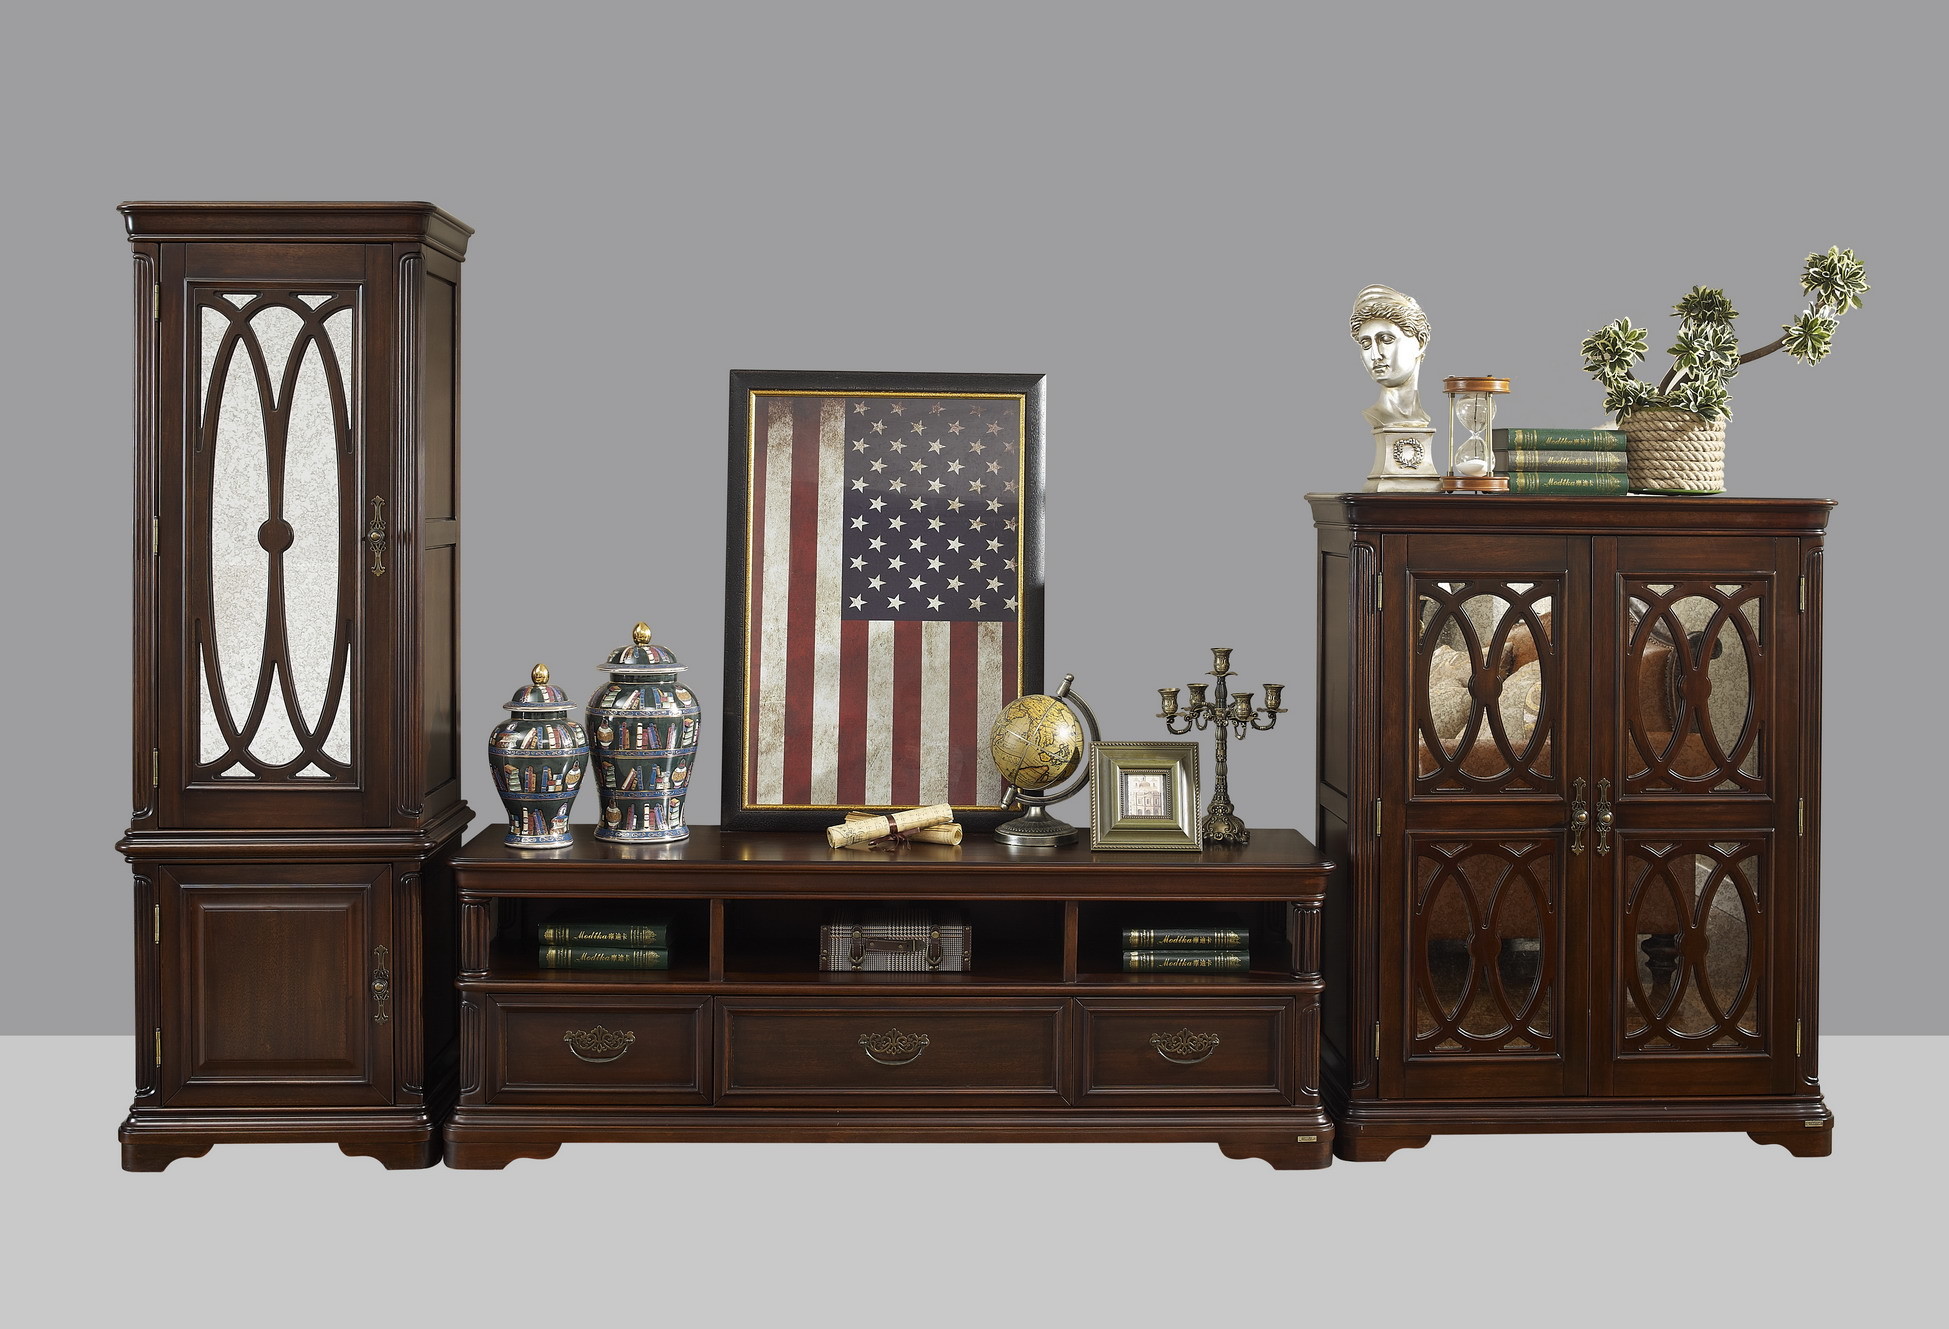  American Antique Living leisure room furniture sets Wooden TV wall unit set by Floor stand and Tall display cabinet Manufactures